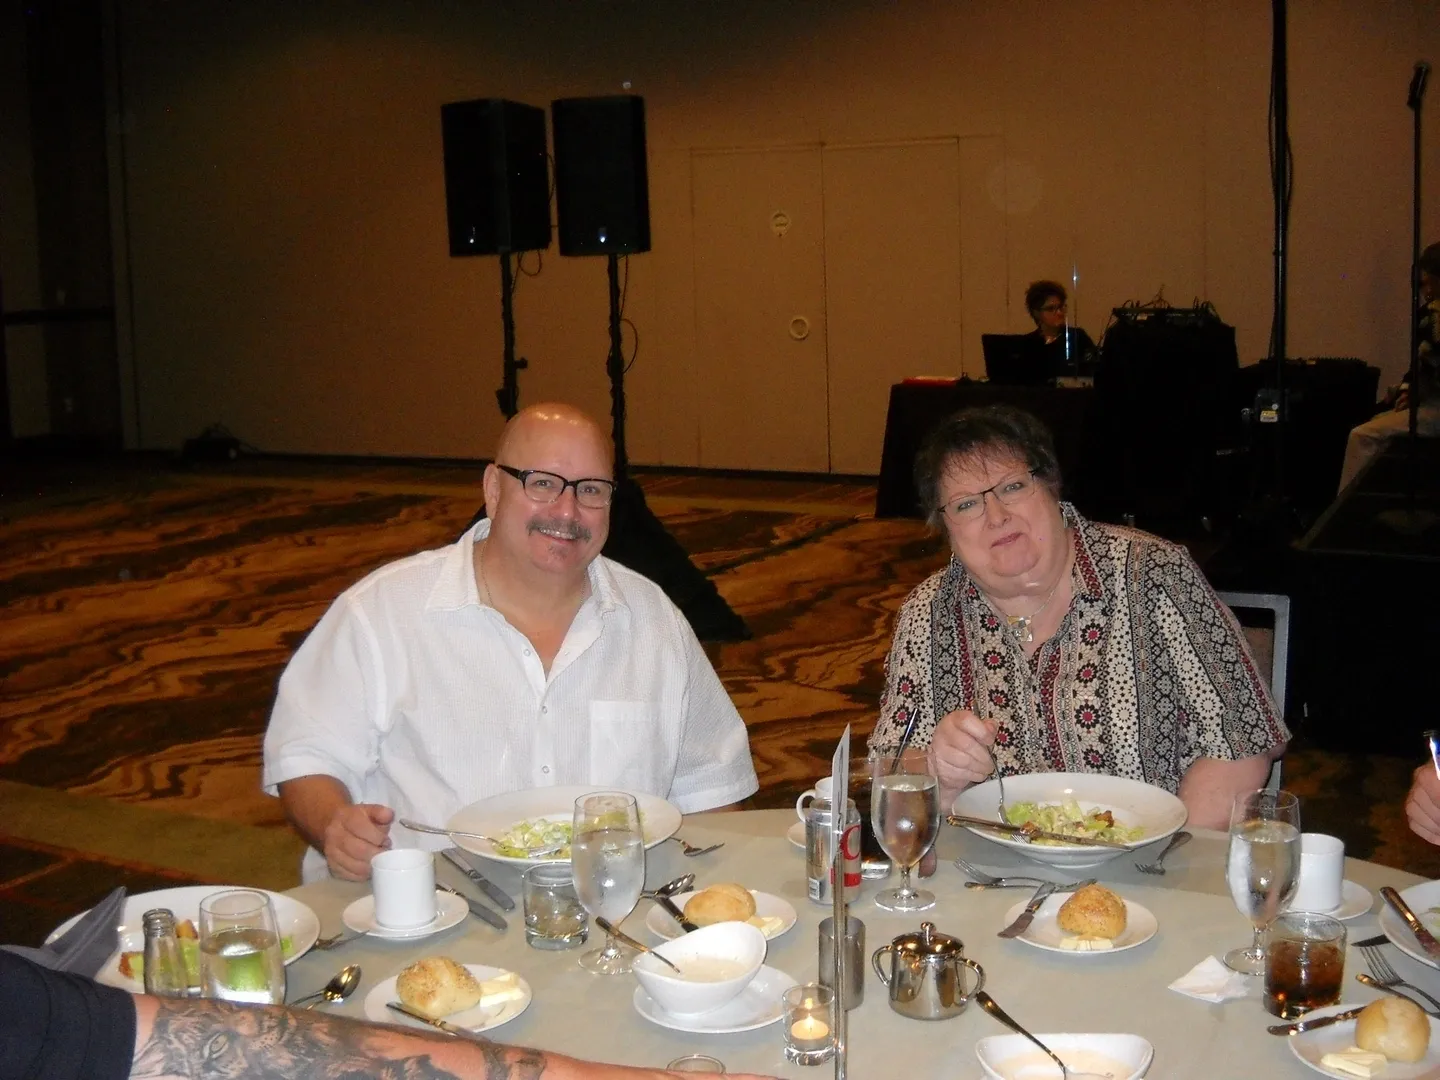 A man and woman sitting at a table with plates of food.